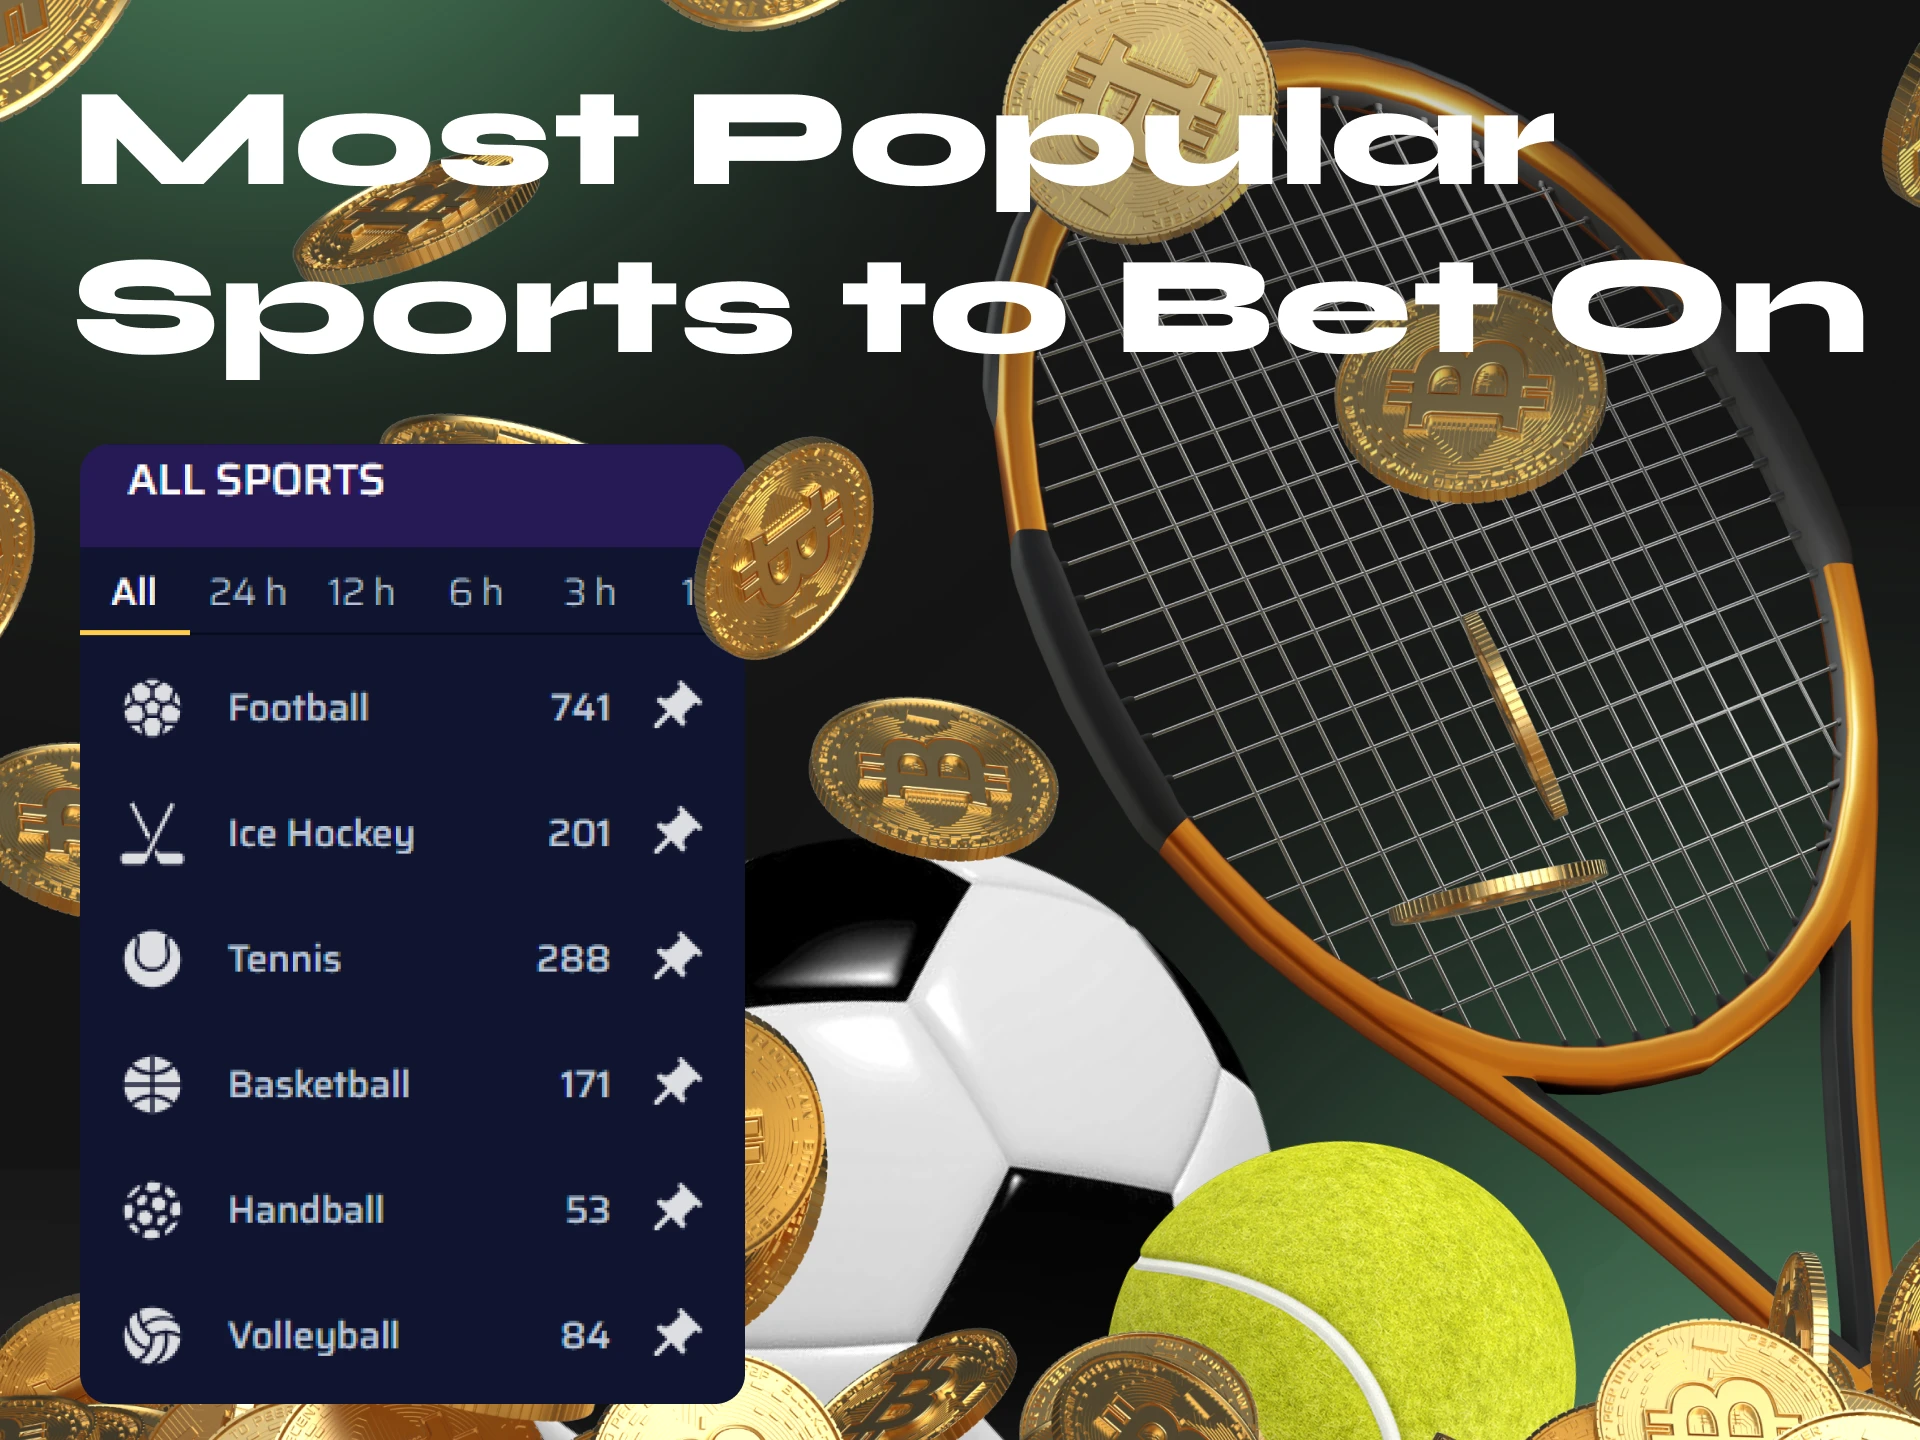 Increase your winnings by betting on popular sporting events at the casino.